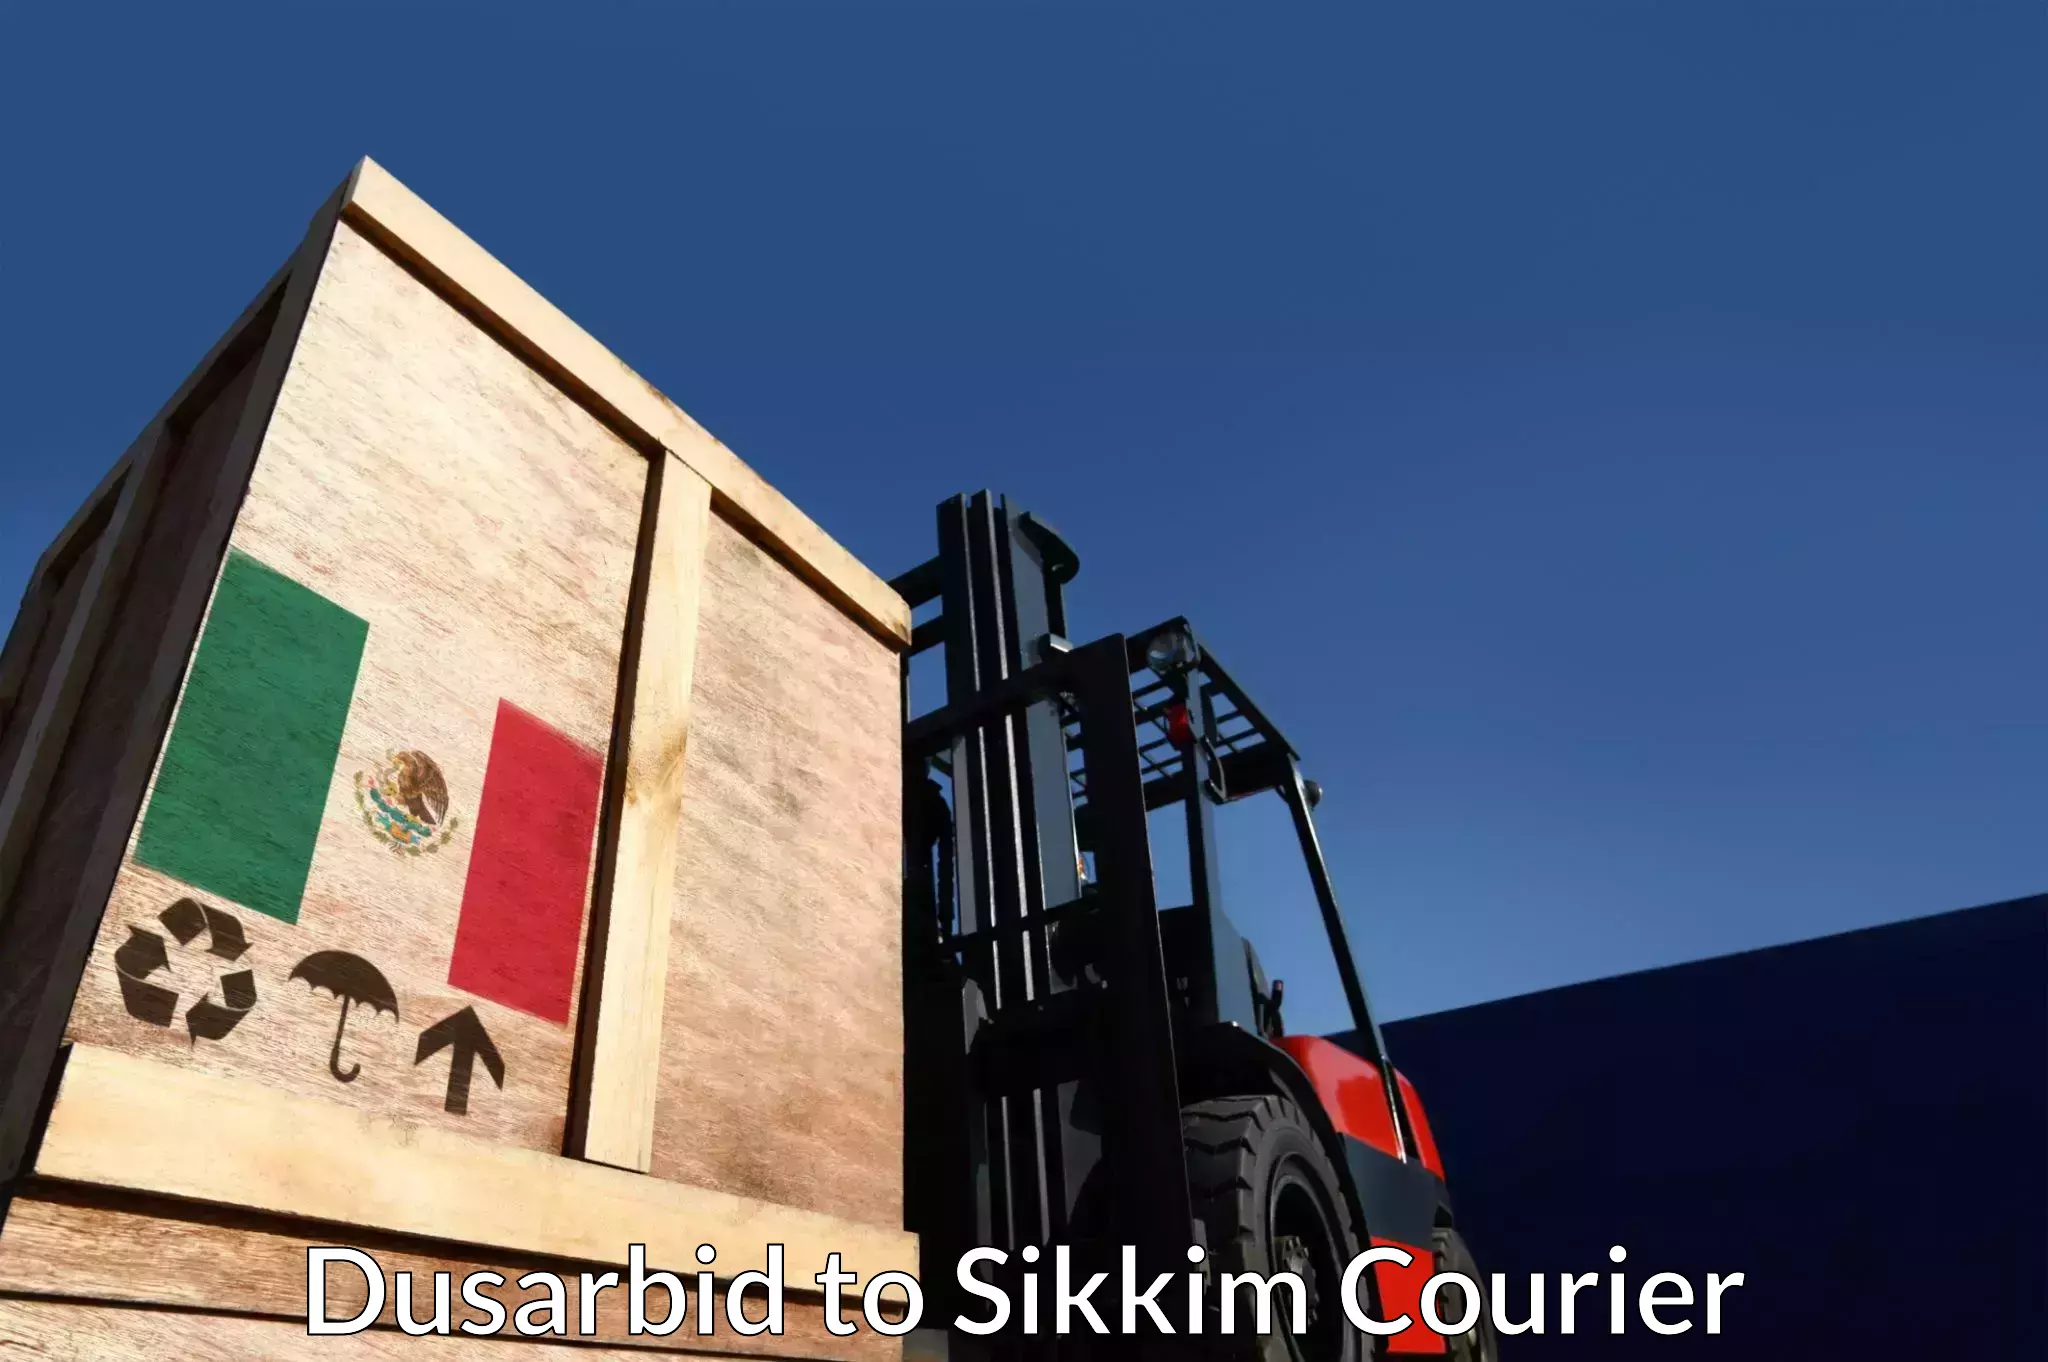 Customer-centric shipping Dusarbid to South Sikkim